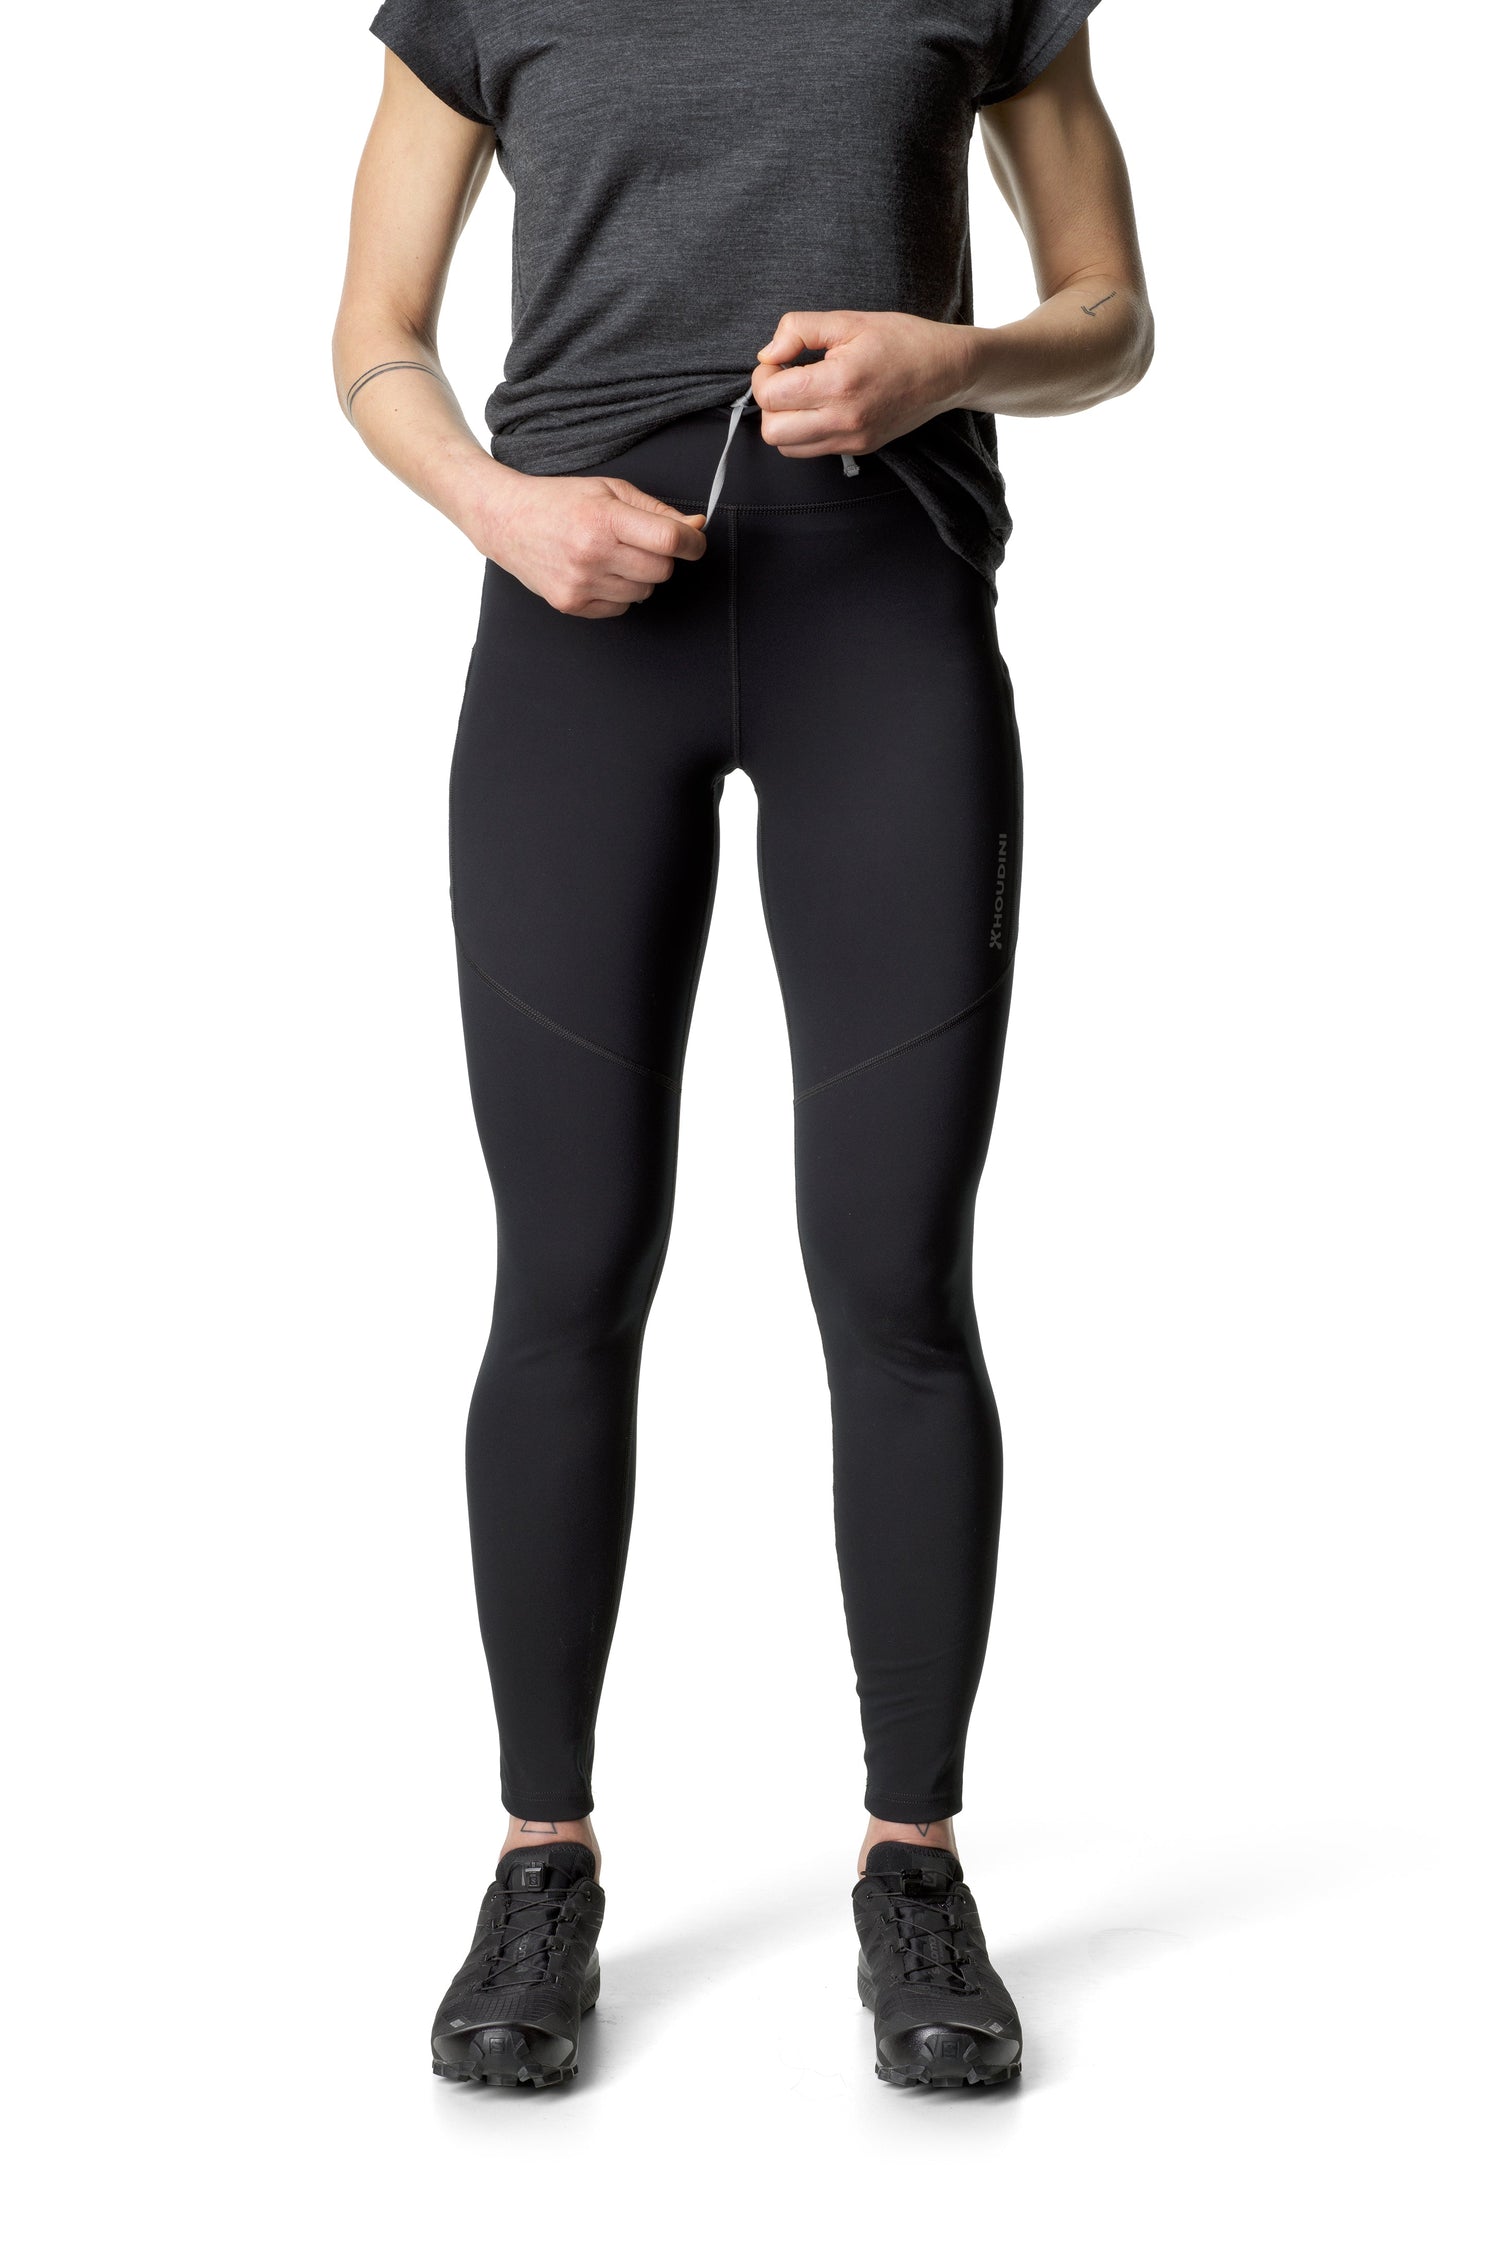 Houdini - W's Adventure Tights - Recycled Polyester - Weekendbee - sustainable sportswear